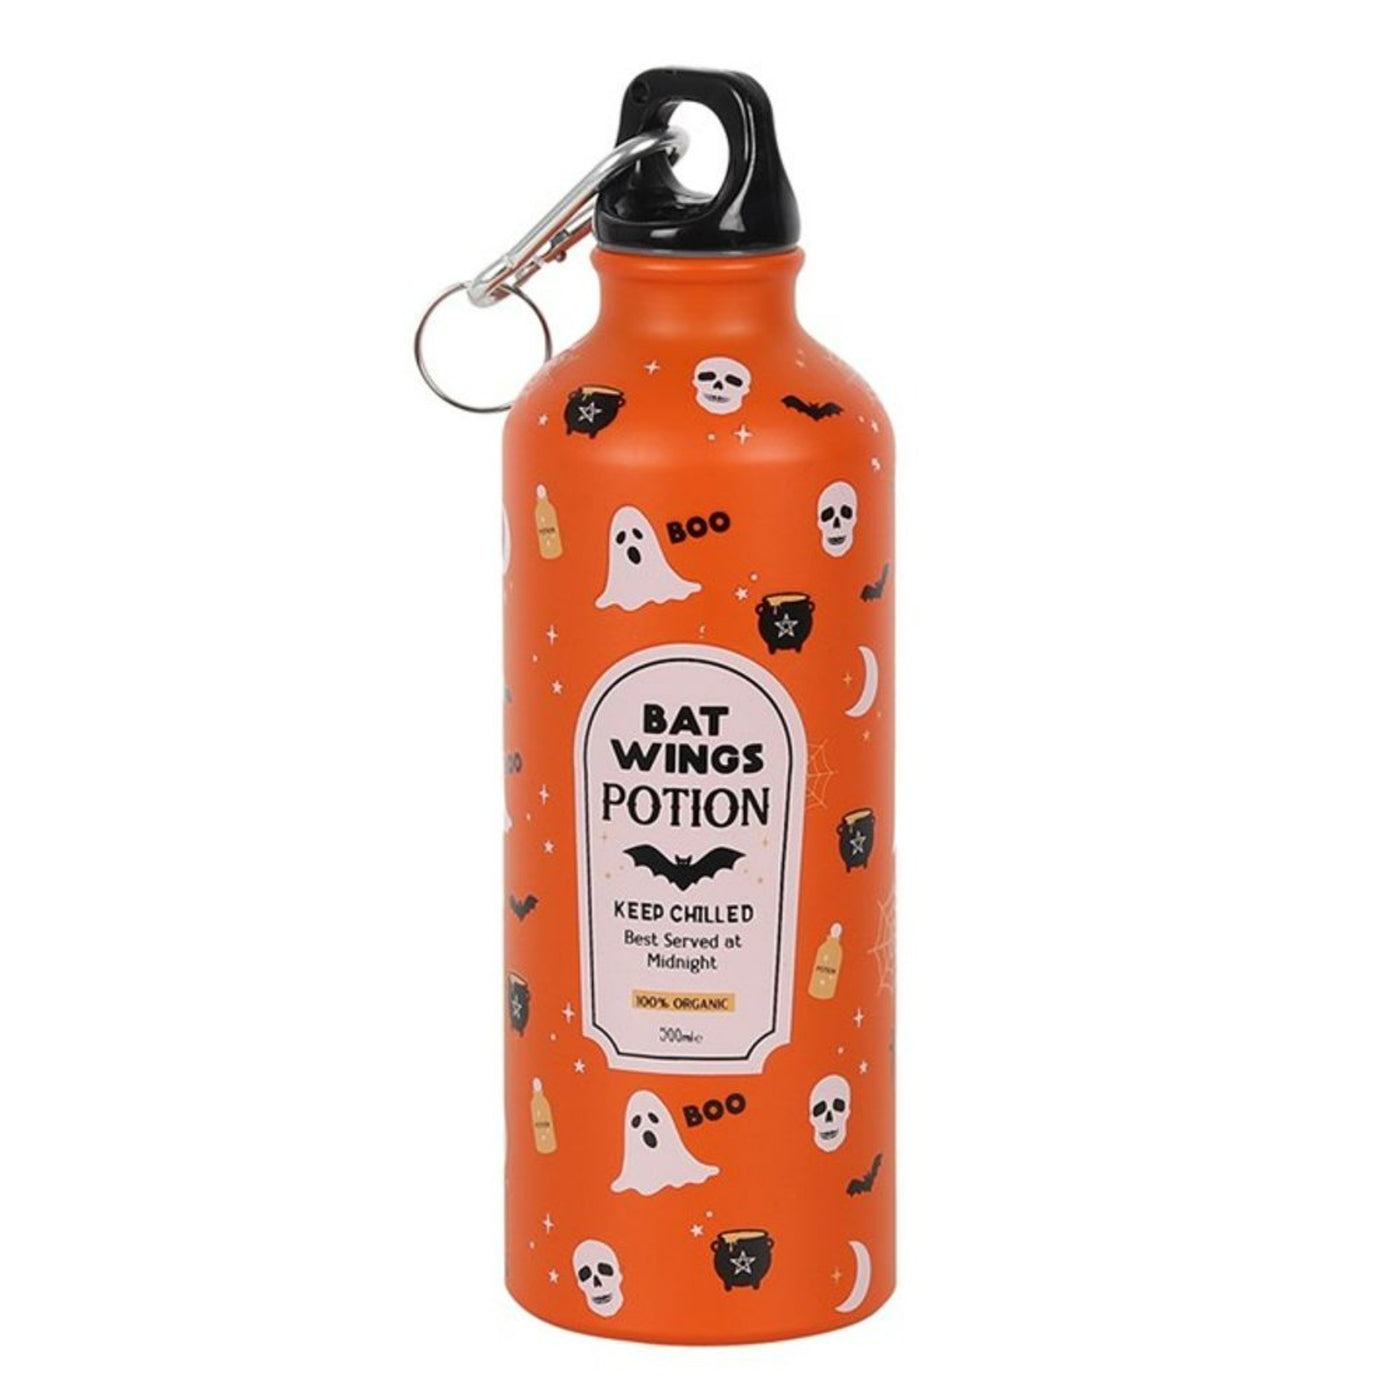 Bat Wings Potion Metal Orange Halloween Water Bottle. With Ghost And Bats Print.